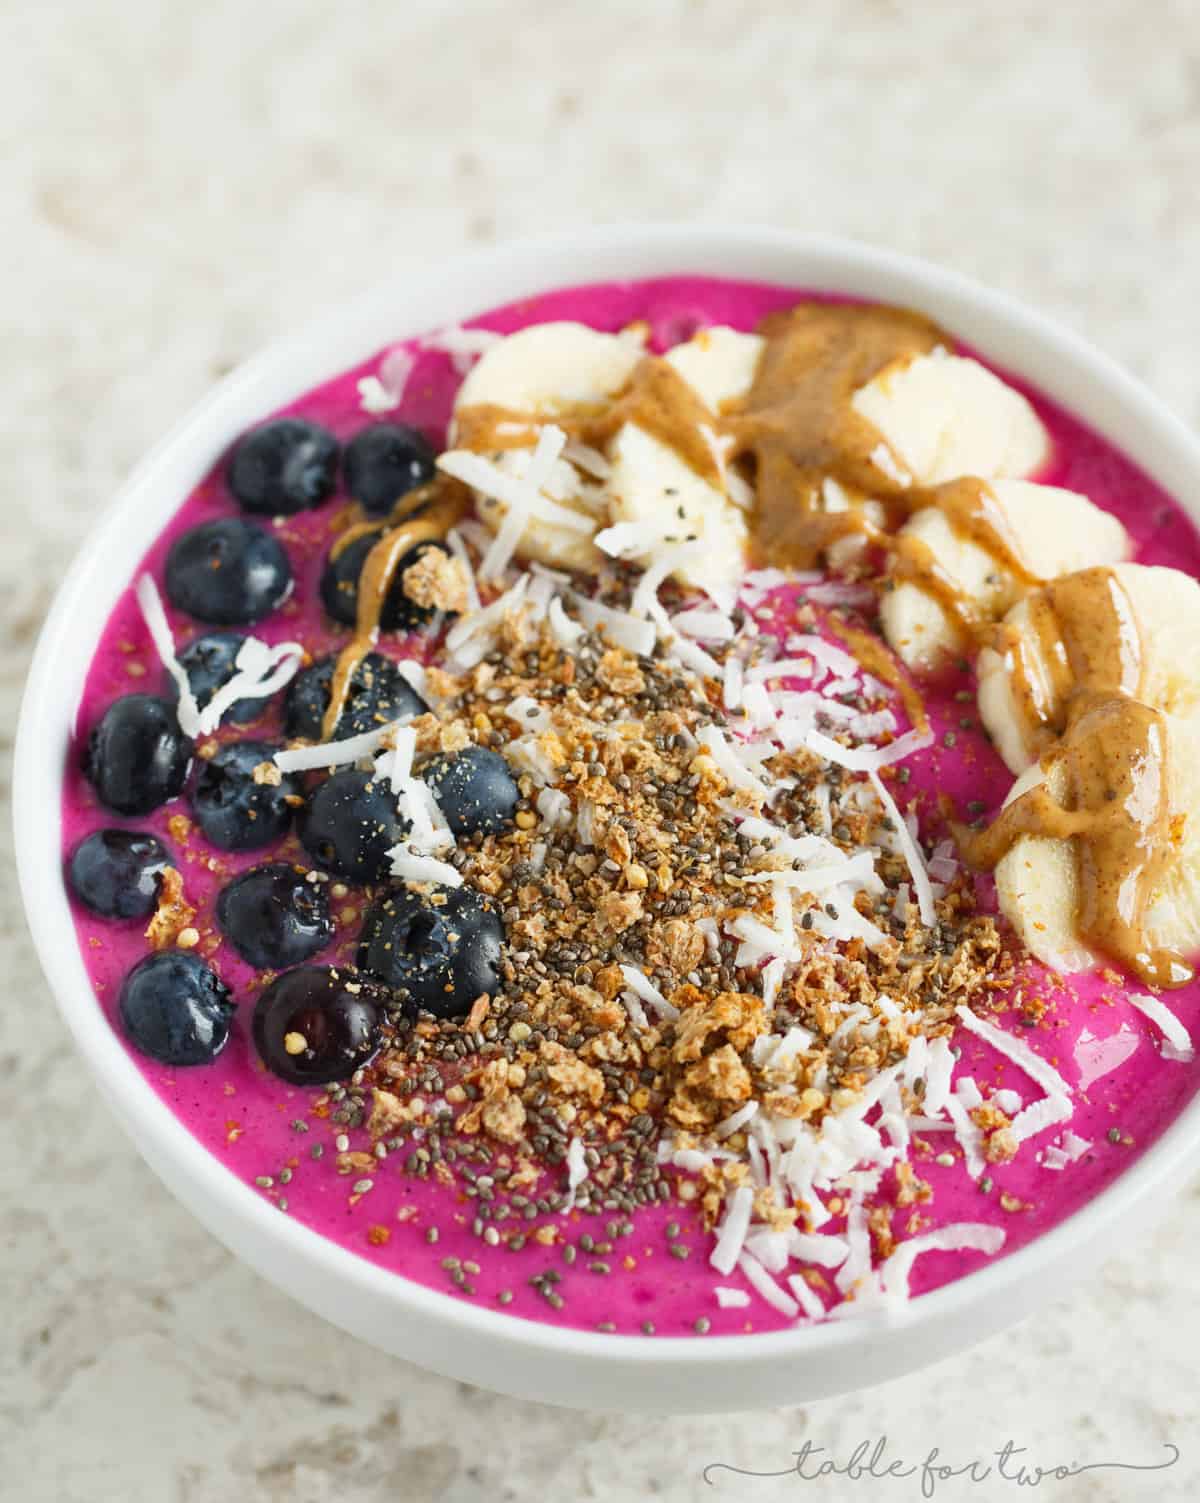 A pitaya smoothie bowl, topped with blueberries on the left side, bananas and almond butter on the right side, and granola and coconut down the middle. 